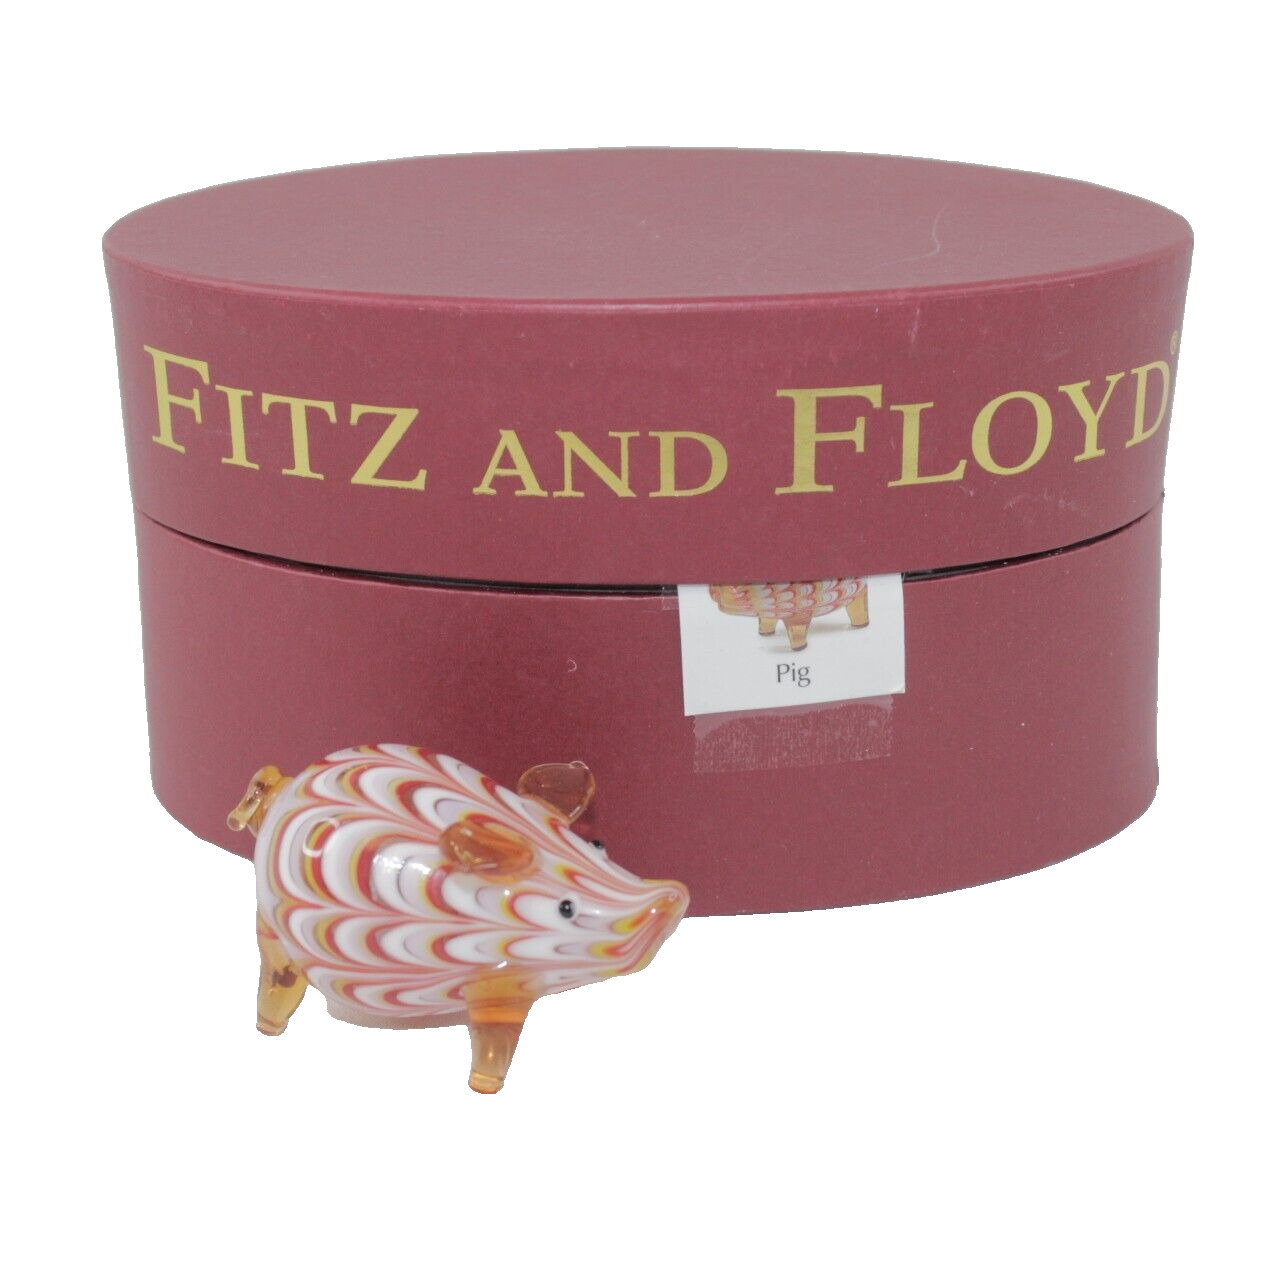 Fitz and Floyd Glass Menagerie Pig 43/102 with Original Box 2003